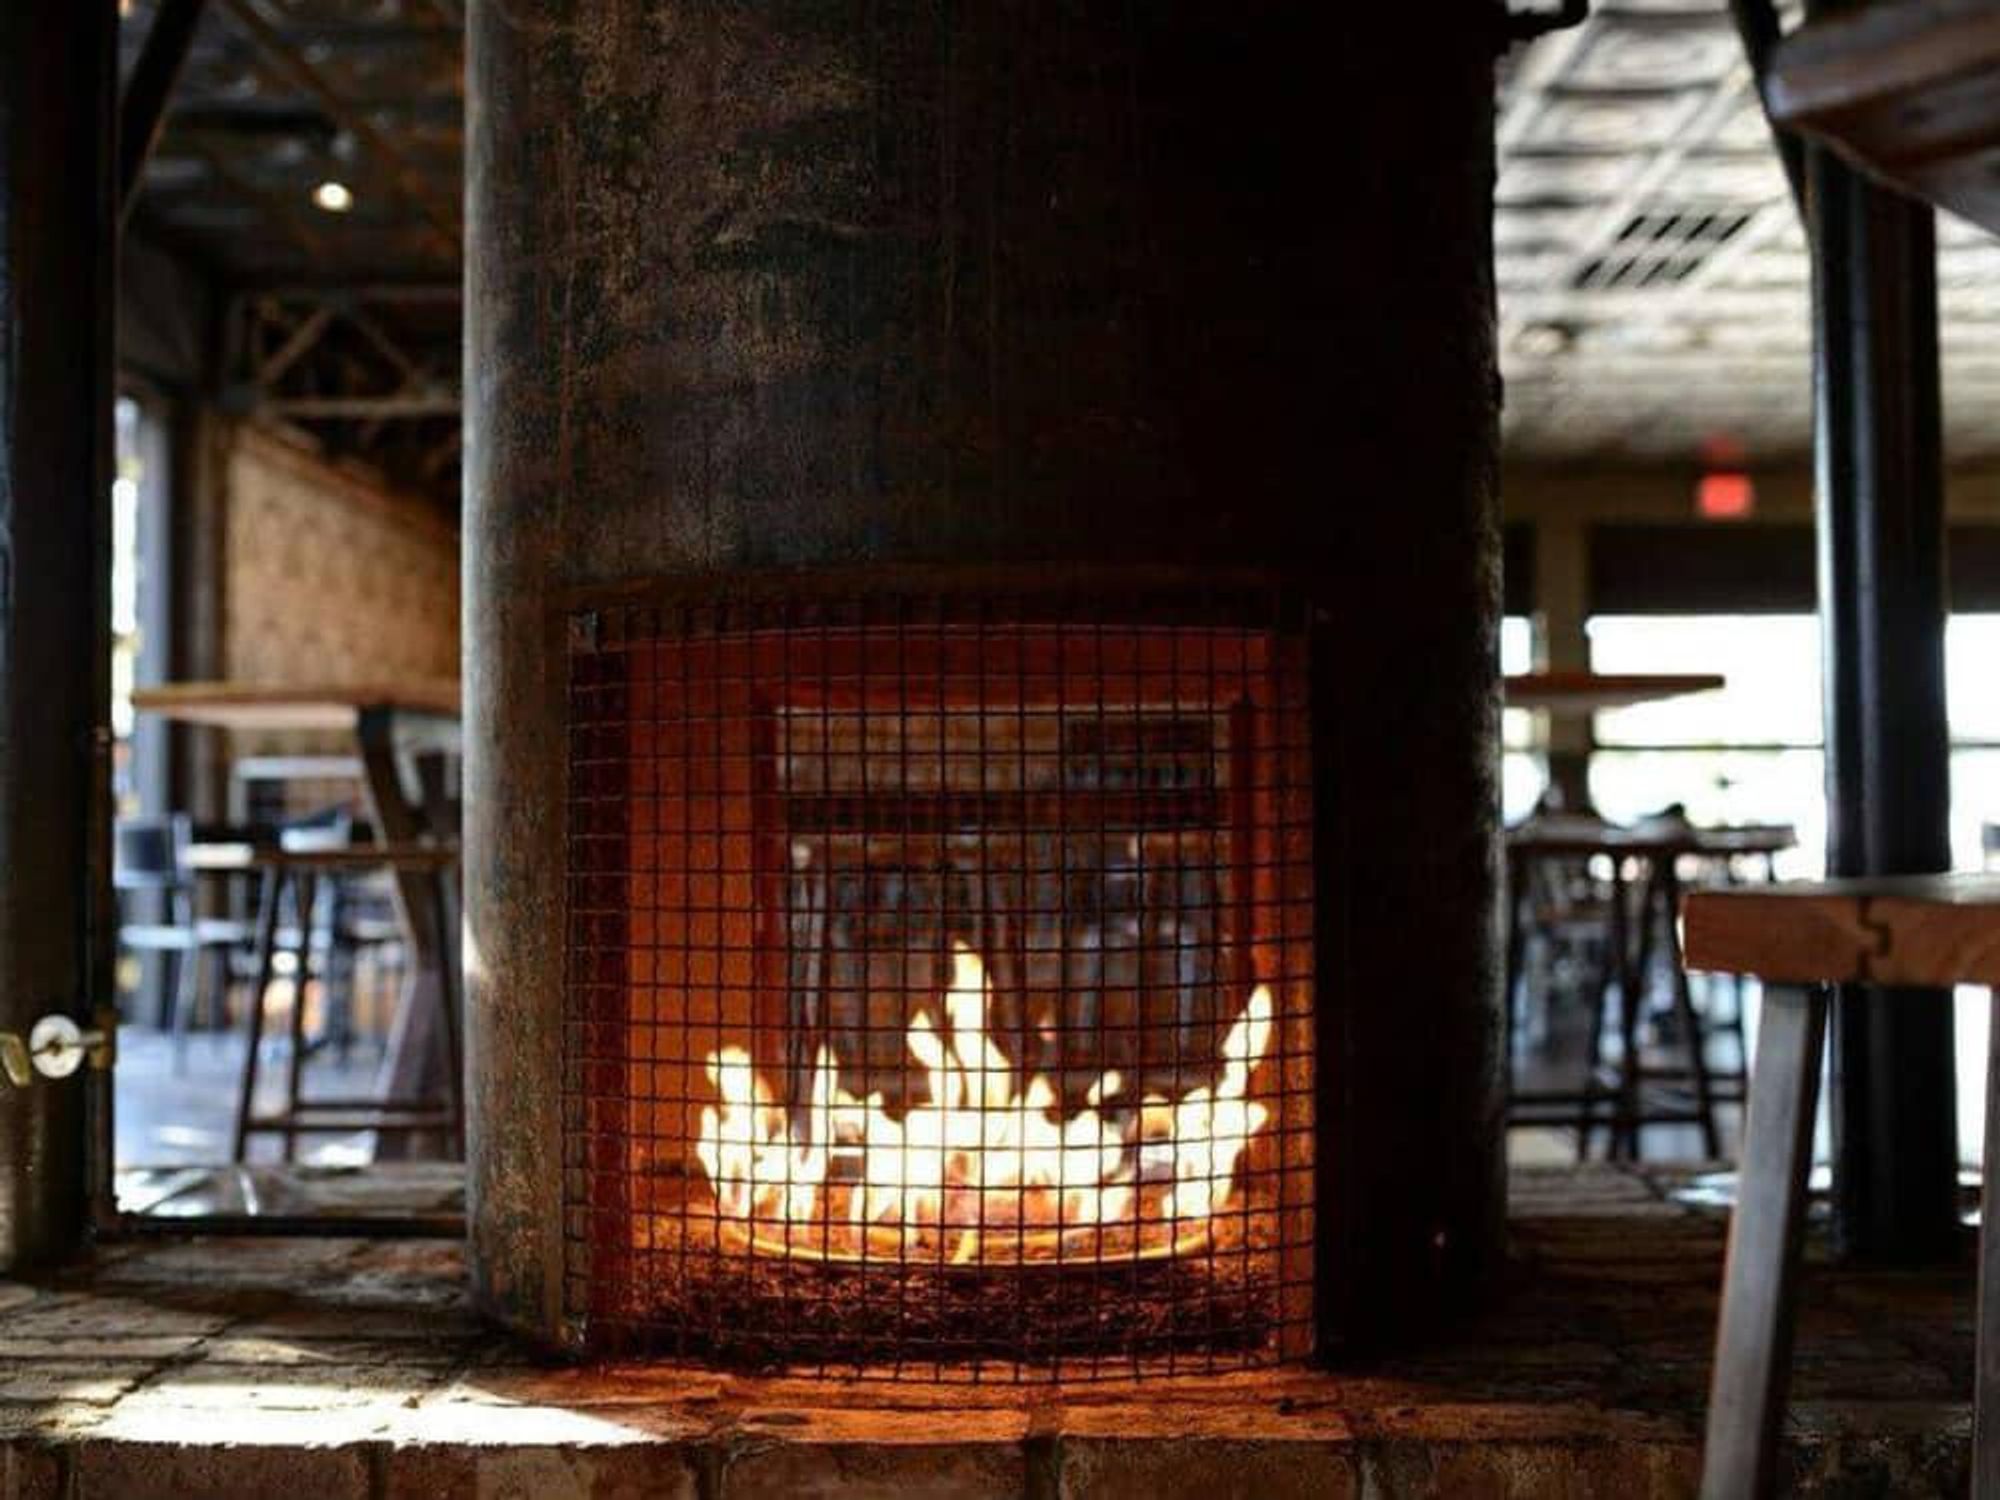 Fireplace at Henry's Majestic restaurant in Dallas